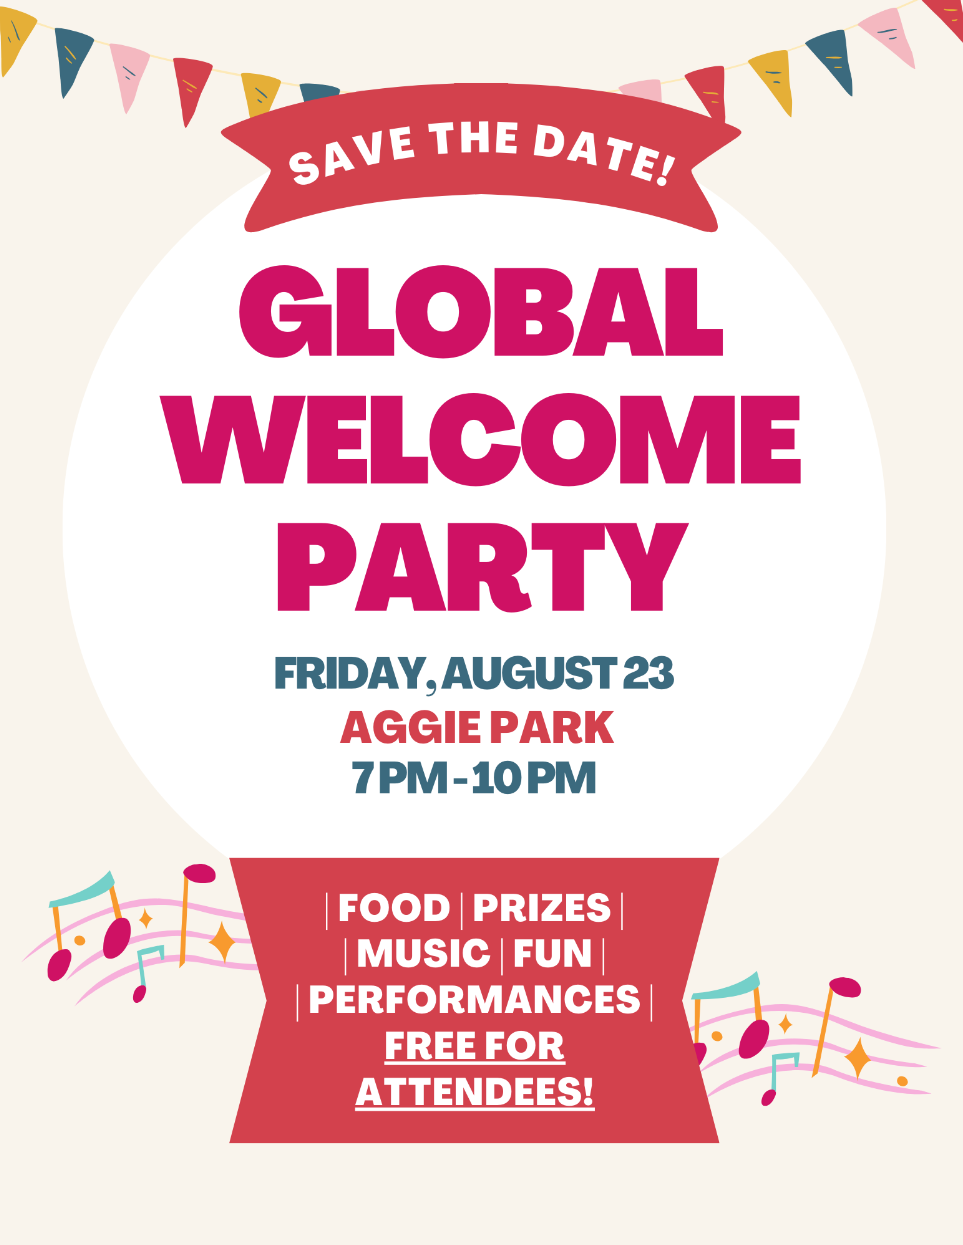 Global Welcome Party poster: Friday, August 23, Aggie Park, 7-10 PM